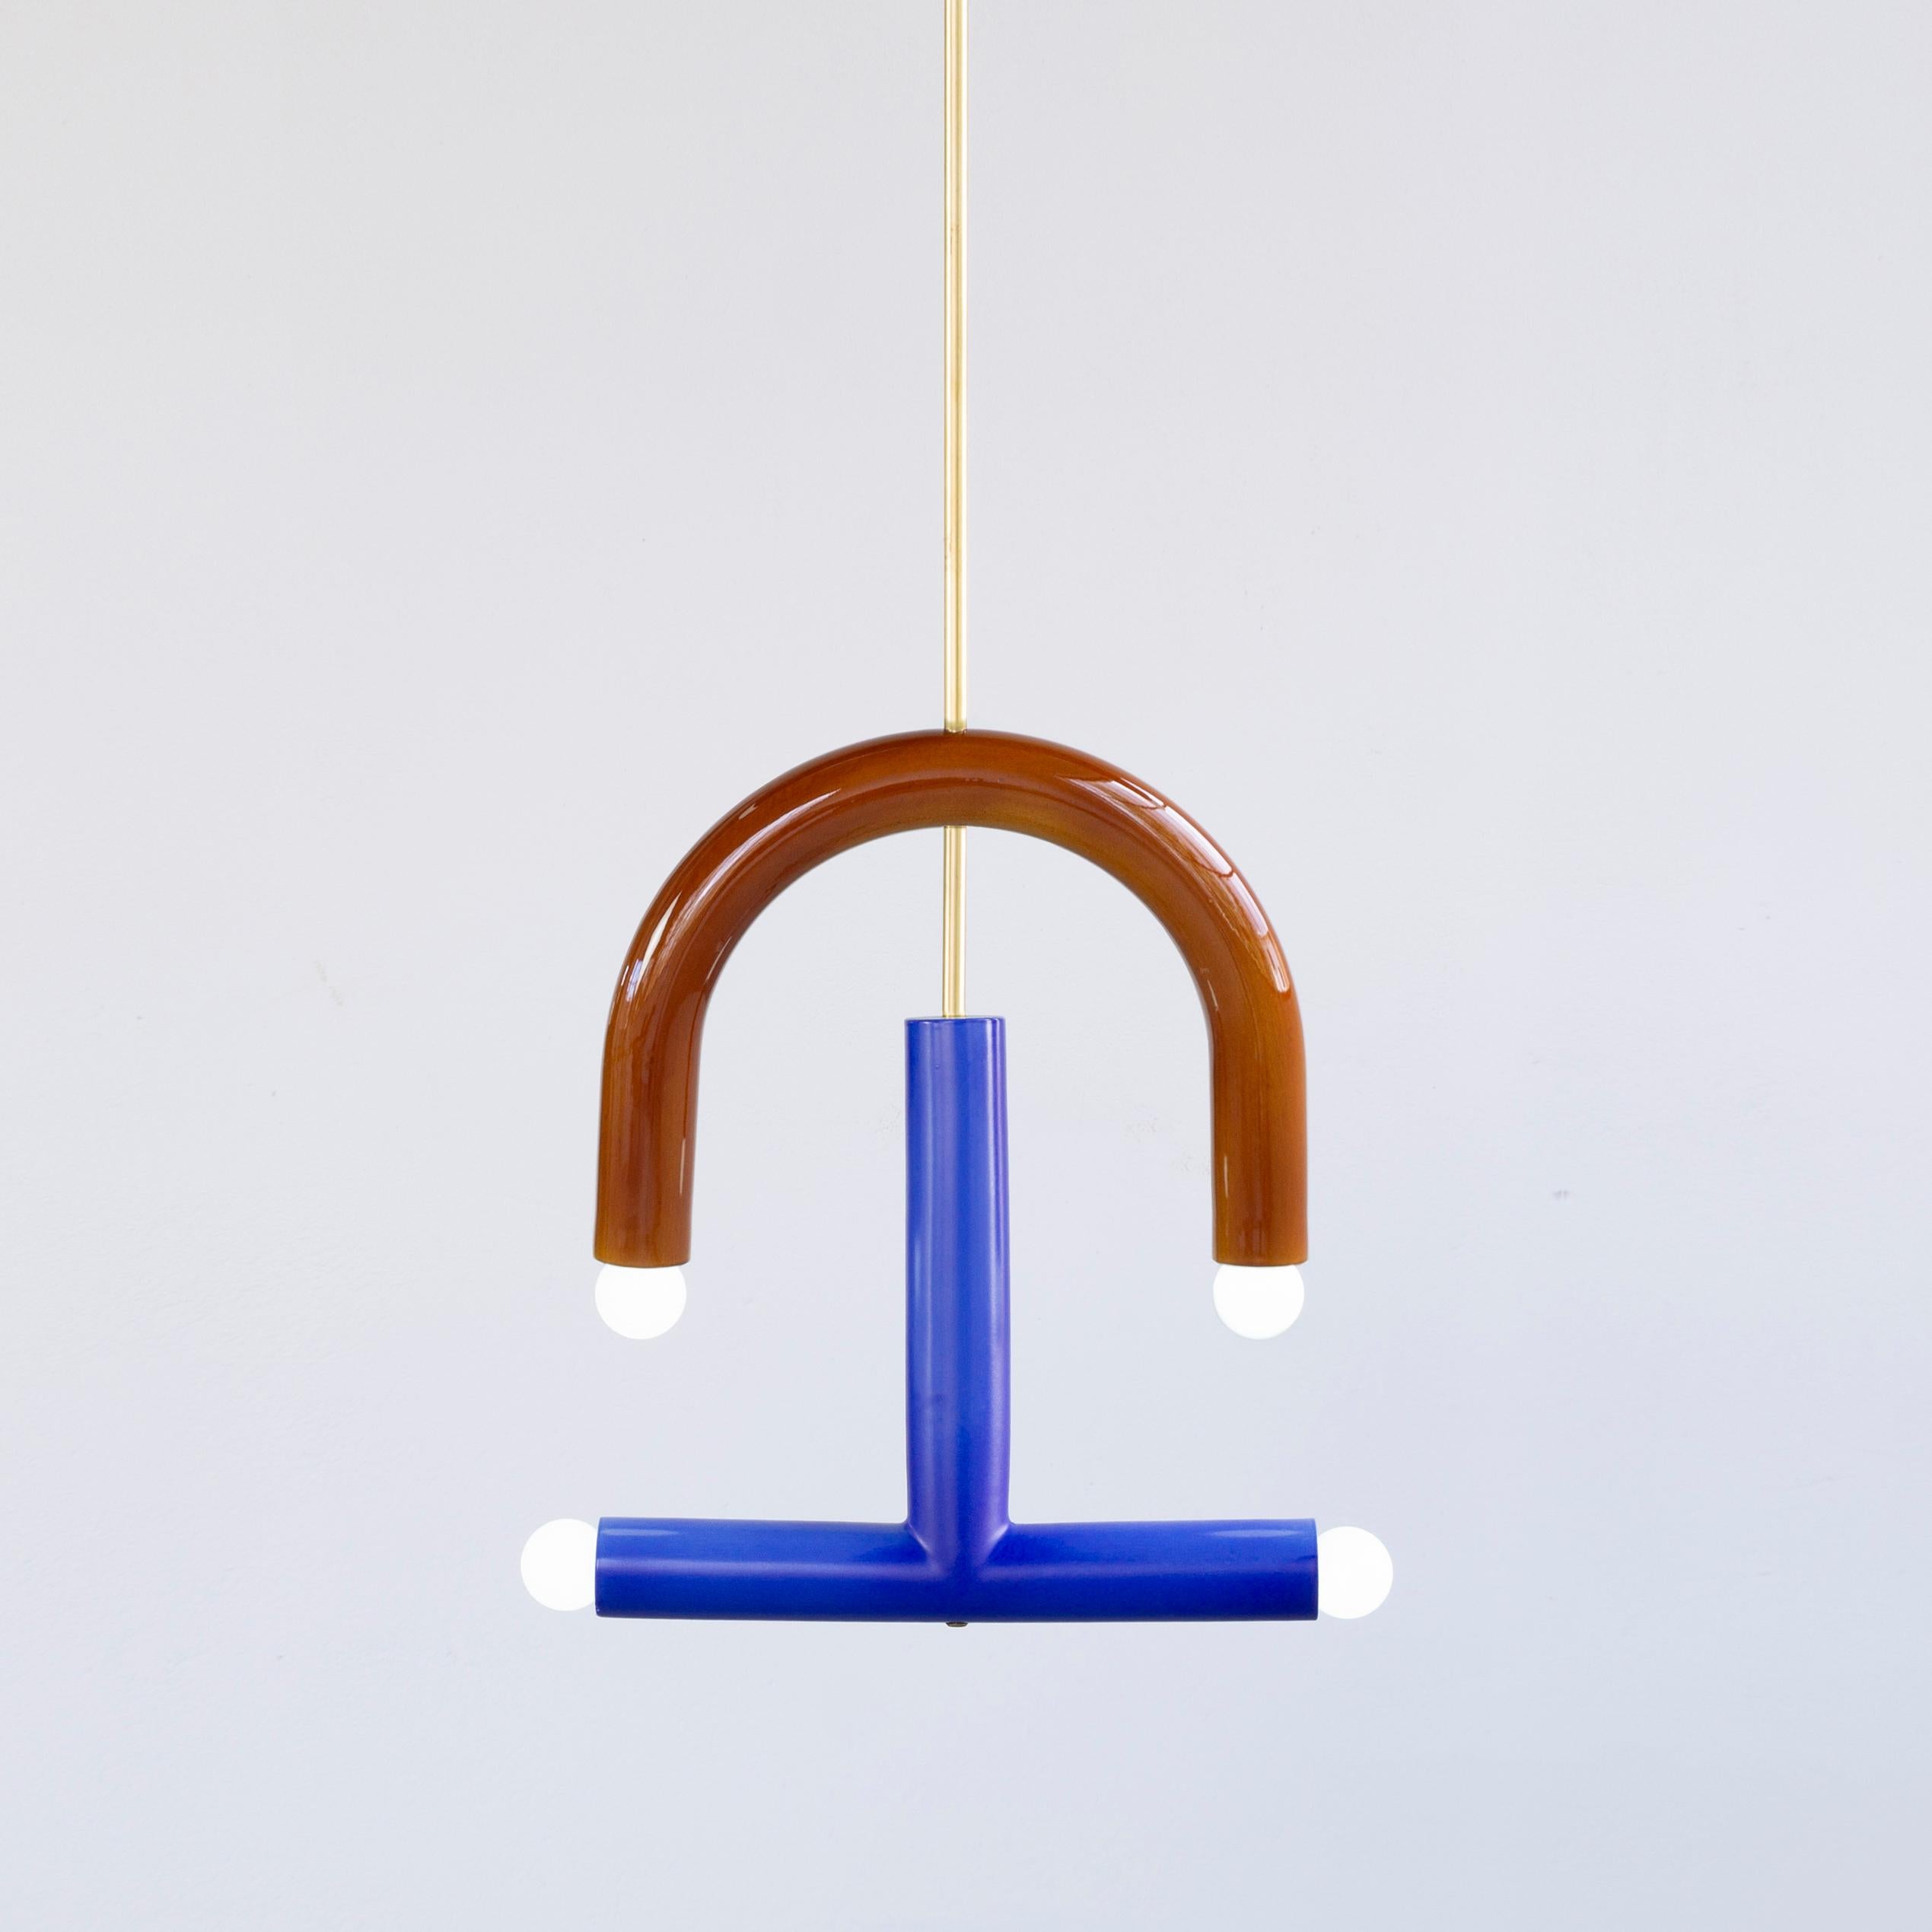 The lighting fixture is part of TRN collection. Three dimensional objects inspired by Jan Tarasin painting have a simple calligraphic form so they can play and talk together as if they were letters from a non-existent alphabet.
 

The hand